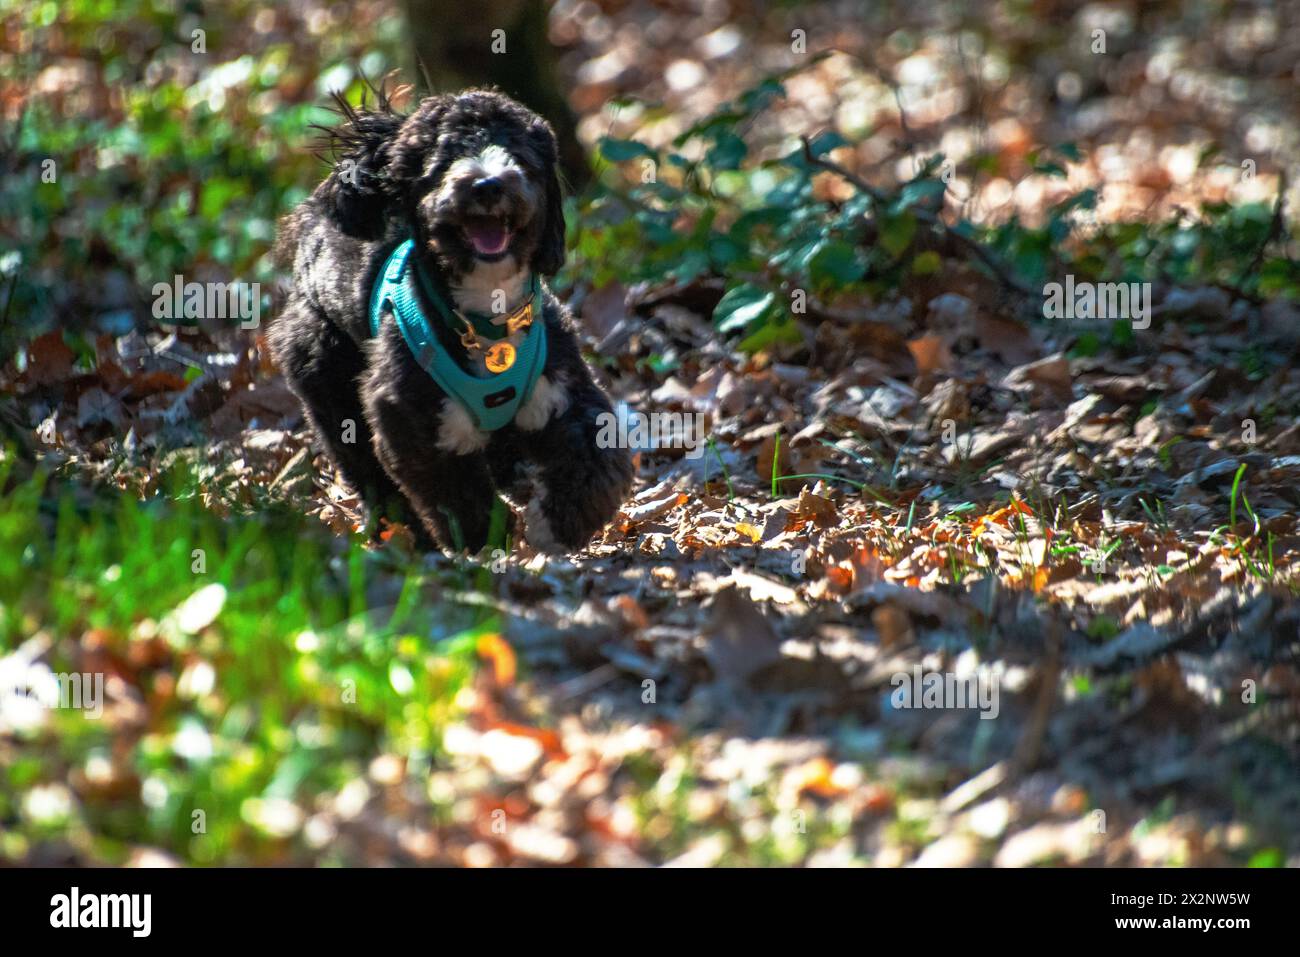 In the sunny forest, a little Maltipoo dashes playfully amidst lush foliage, embodying the joy of a carefree romp. Stock Photo